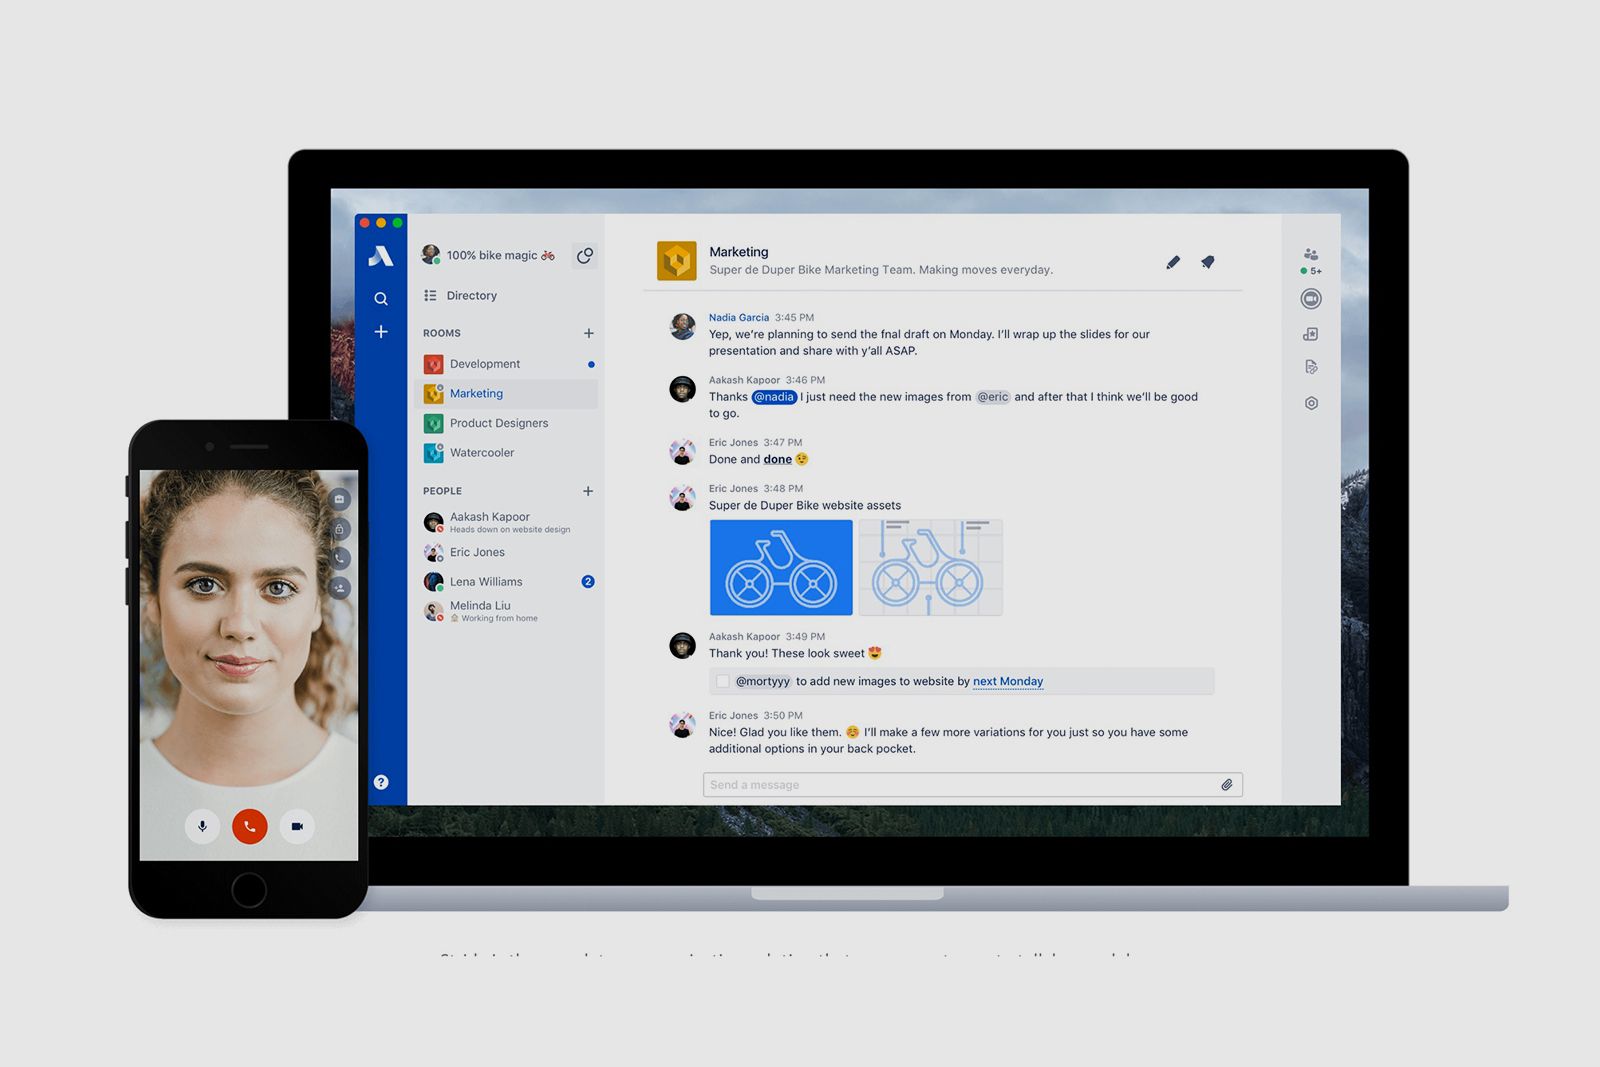 Stride is a new Slack-like chat app from the makers of HipChat image 1